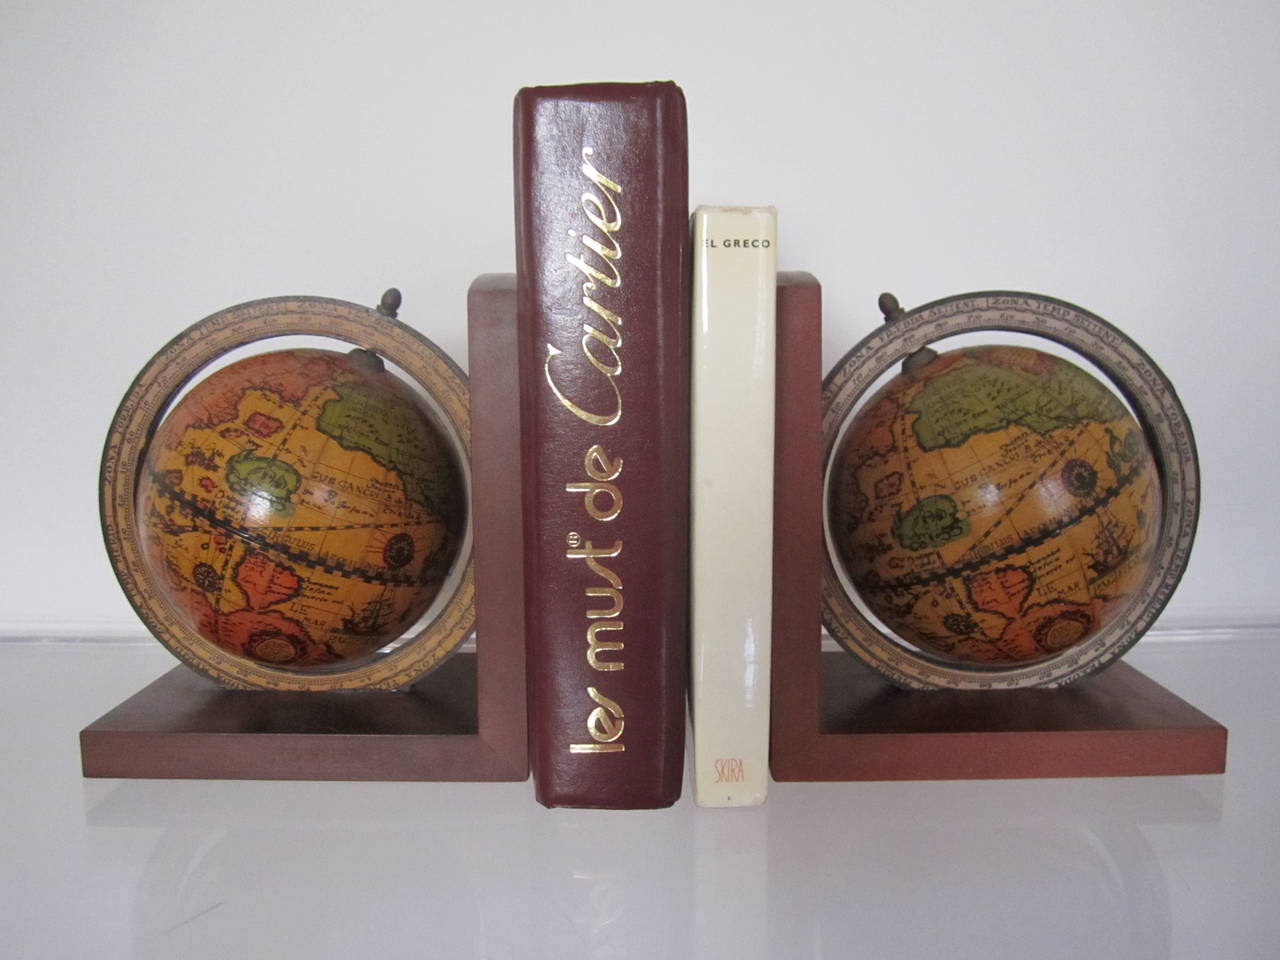 A very cool pair of vintage globe bookends, made in Italy, that spin.